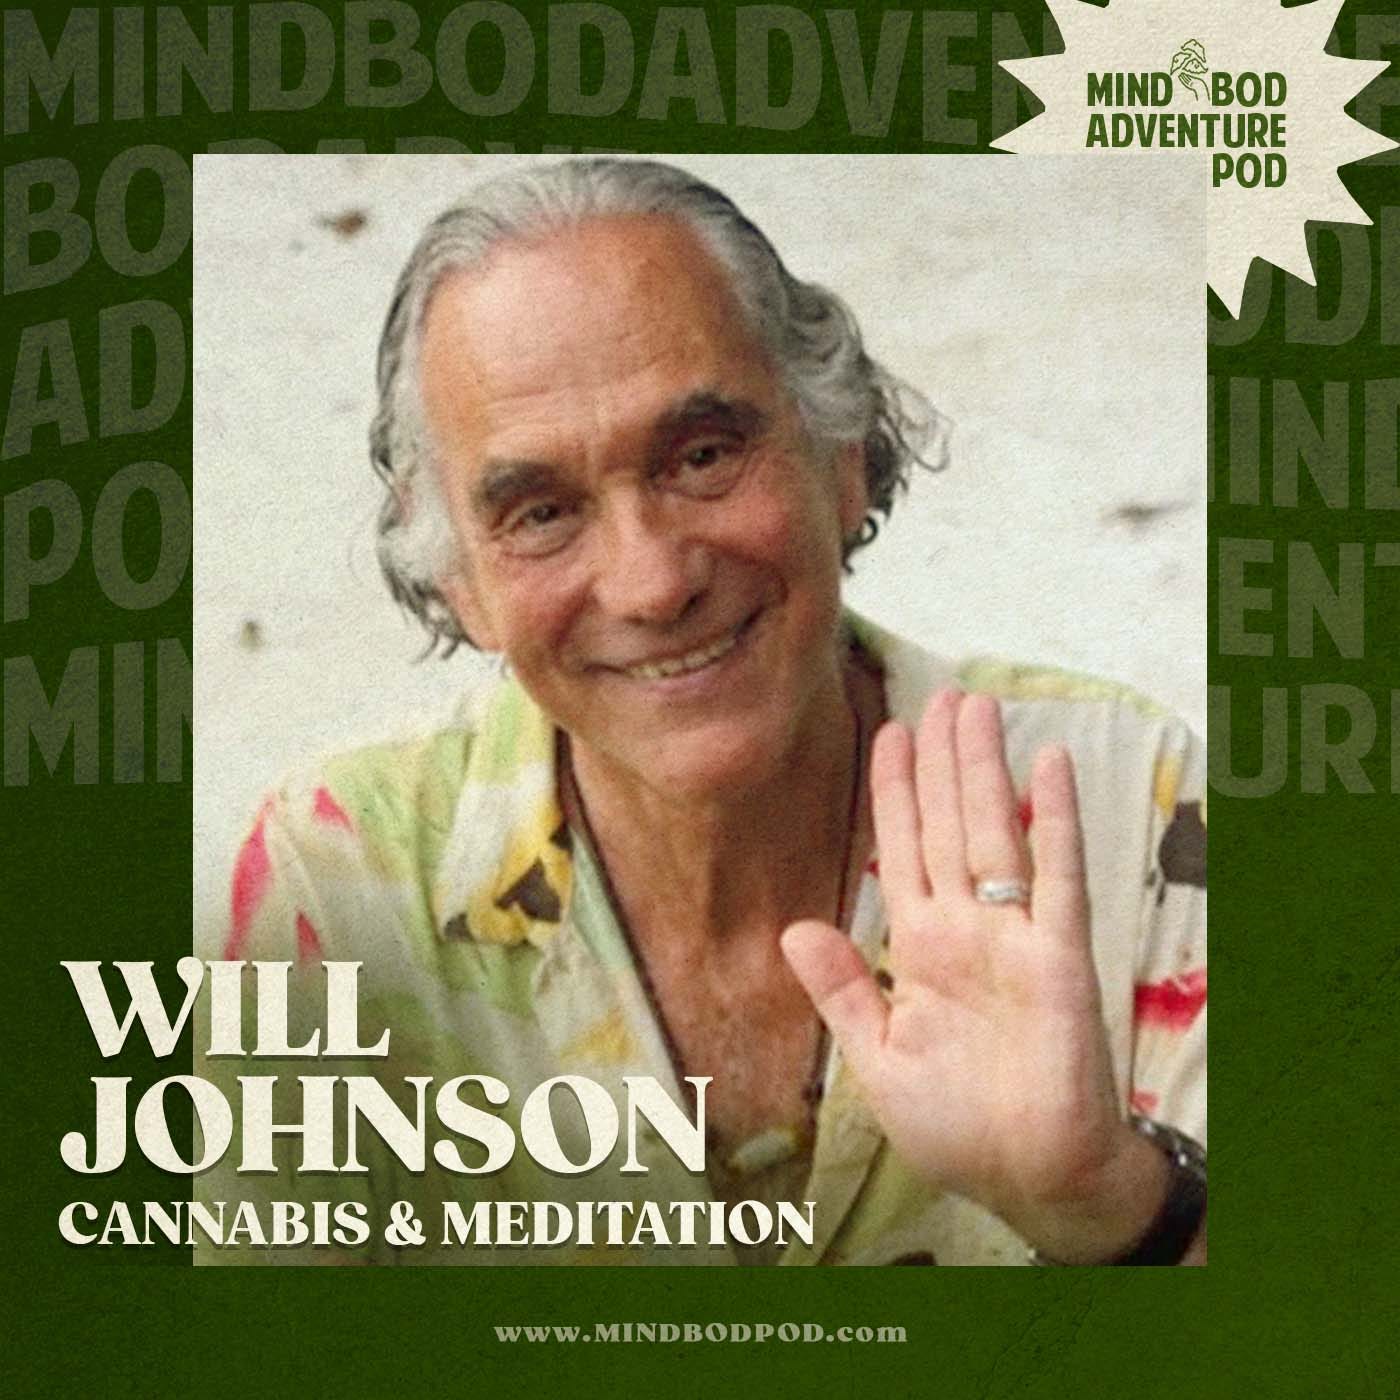 Cannabis and Meditation with Will Johnson